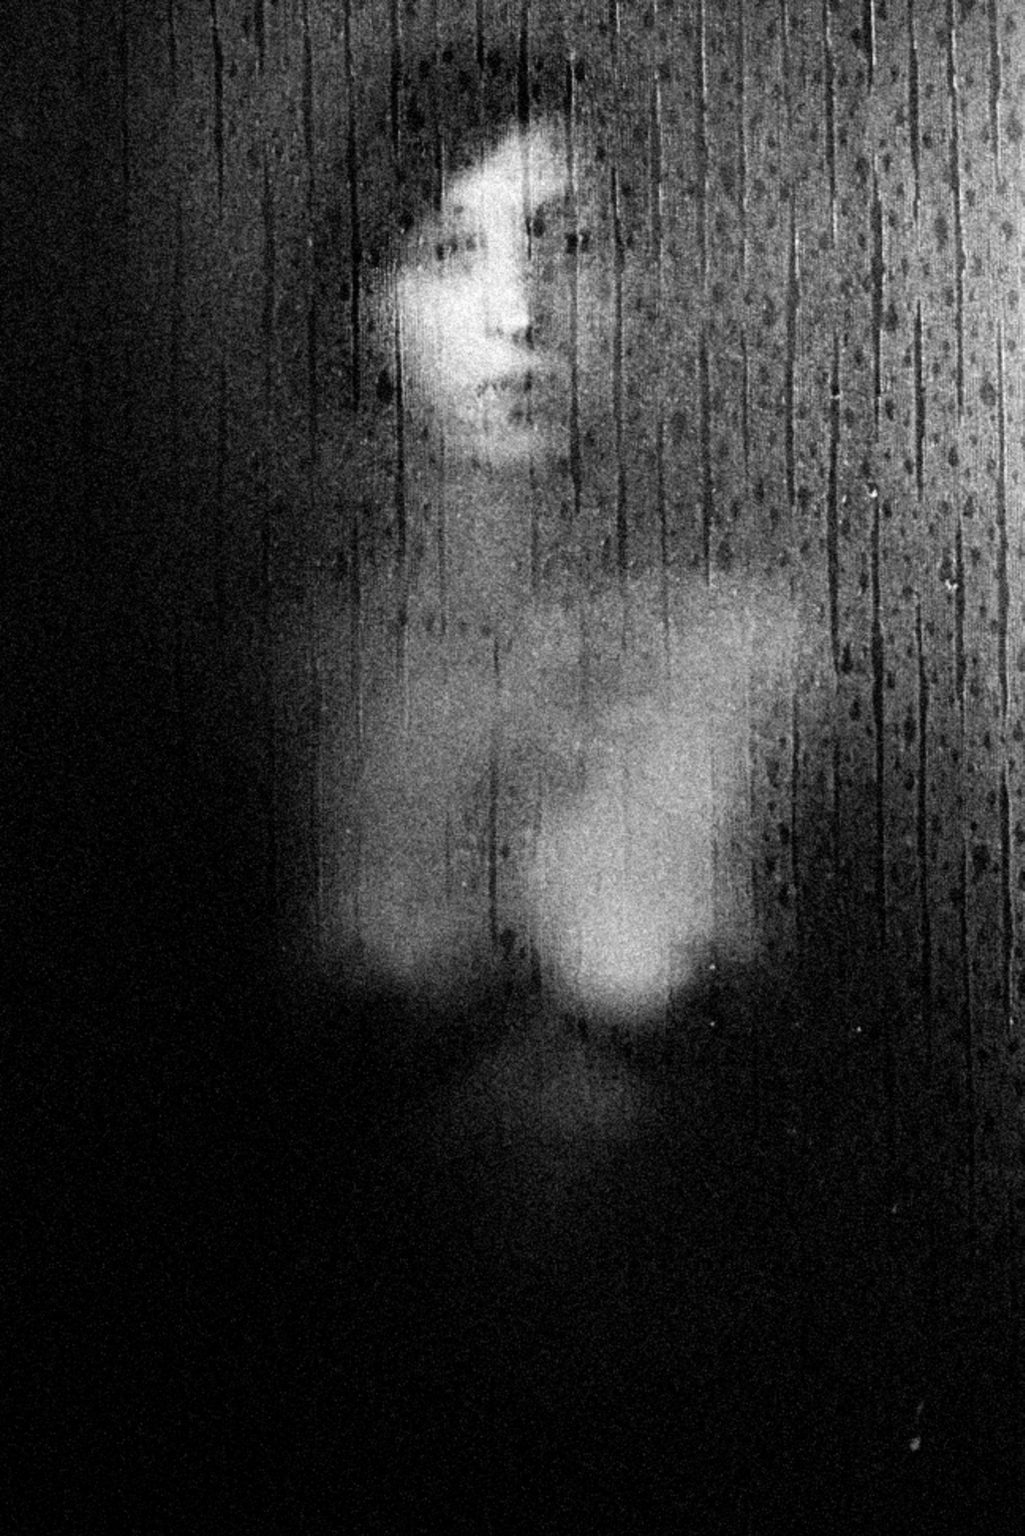 Berlin , 2011- Berlin Diary is a research that documents the margins of society; an investigation into different worlds including relationships; the loneliness of the human being; alcoholism and abuse; lovers and their conflicts and finally the relationship between people and city.A young girl in a shower of a sauna.
><
Berlino ,2011- Berlin Diary è una ricerca che documenta i margini della società; un'indagine in mondi diversi tra cui si esplorano relazioni; la solitudine dellessere umano; Lalcolismo e gli abusi; gli amanti e i loro conflitti e infine; il rapporto tra persone e città.Una giovane donna in una doccia di una sauna.